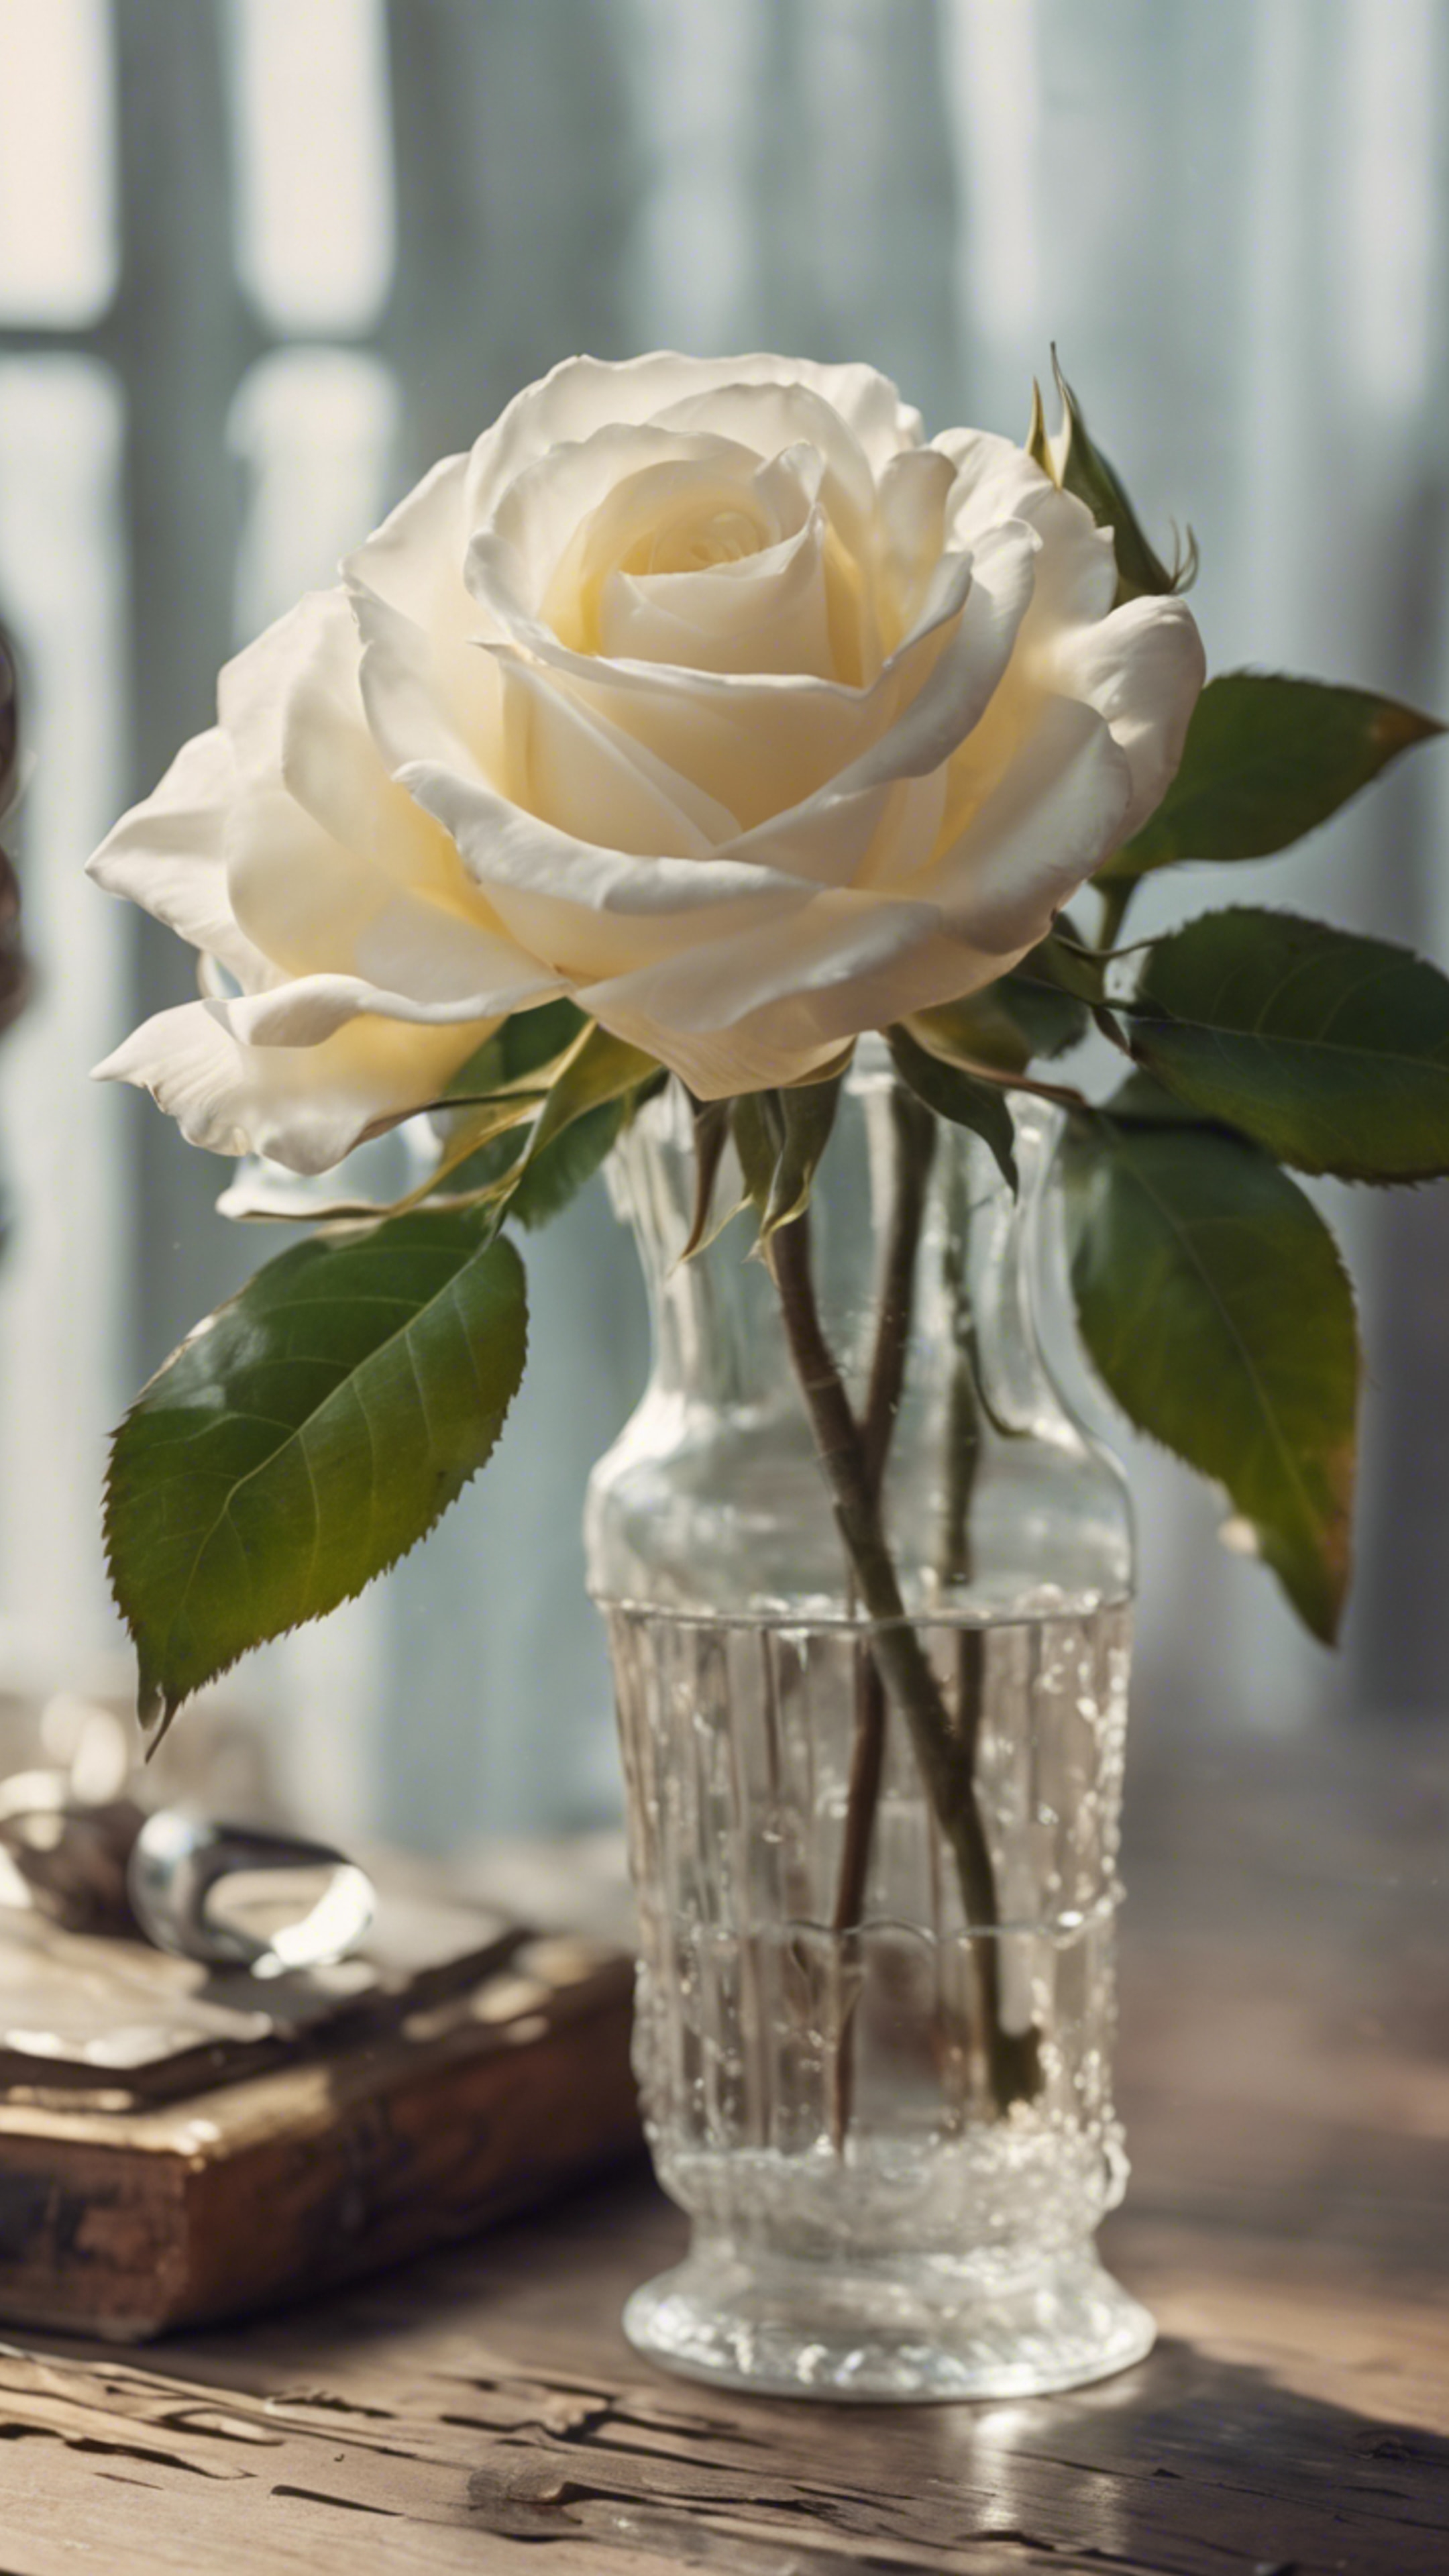 A soft white rose in a vintage glass vase on an antique wooden table. Behang[fc4486b9e2ee4669bbfe]